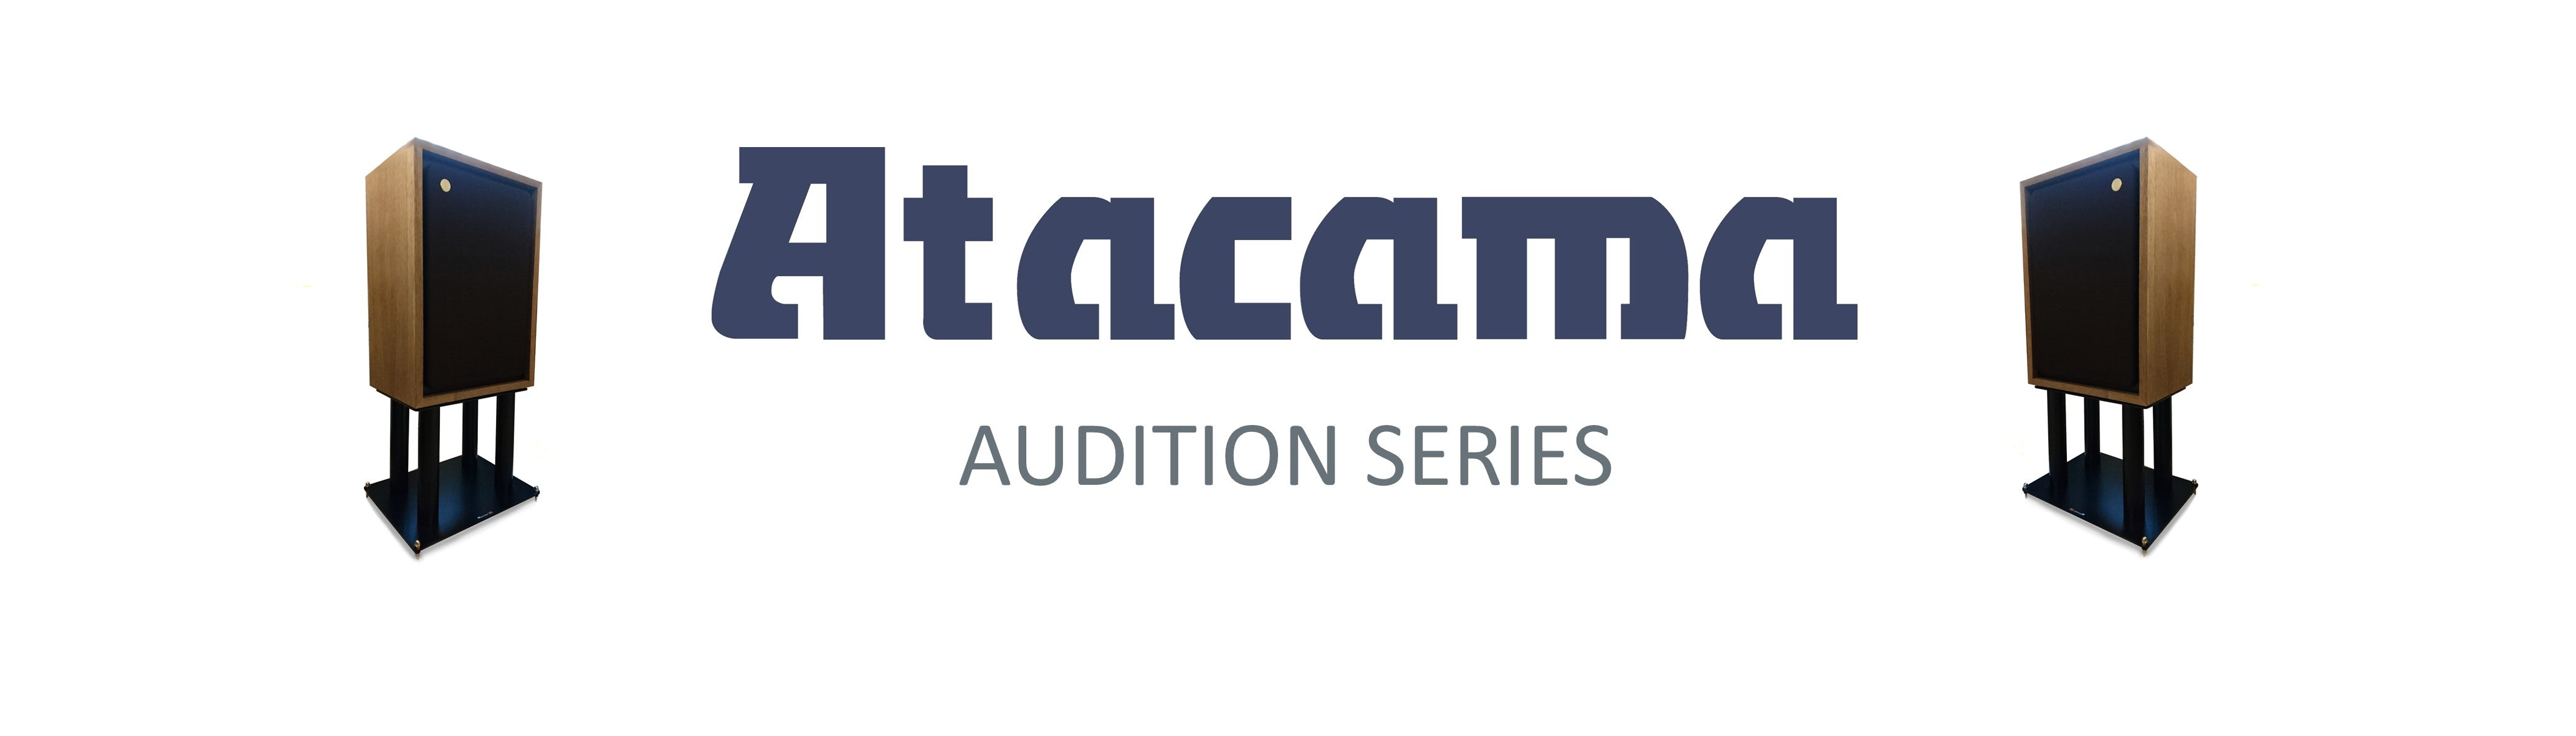 AUDITION SERIES